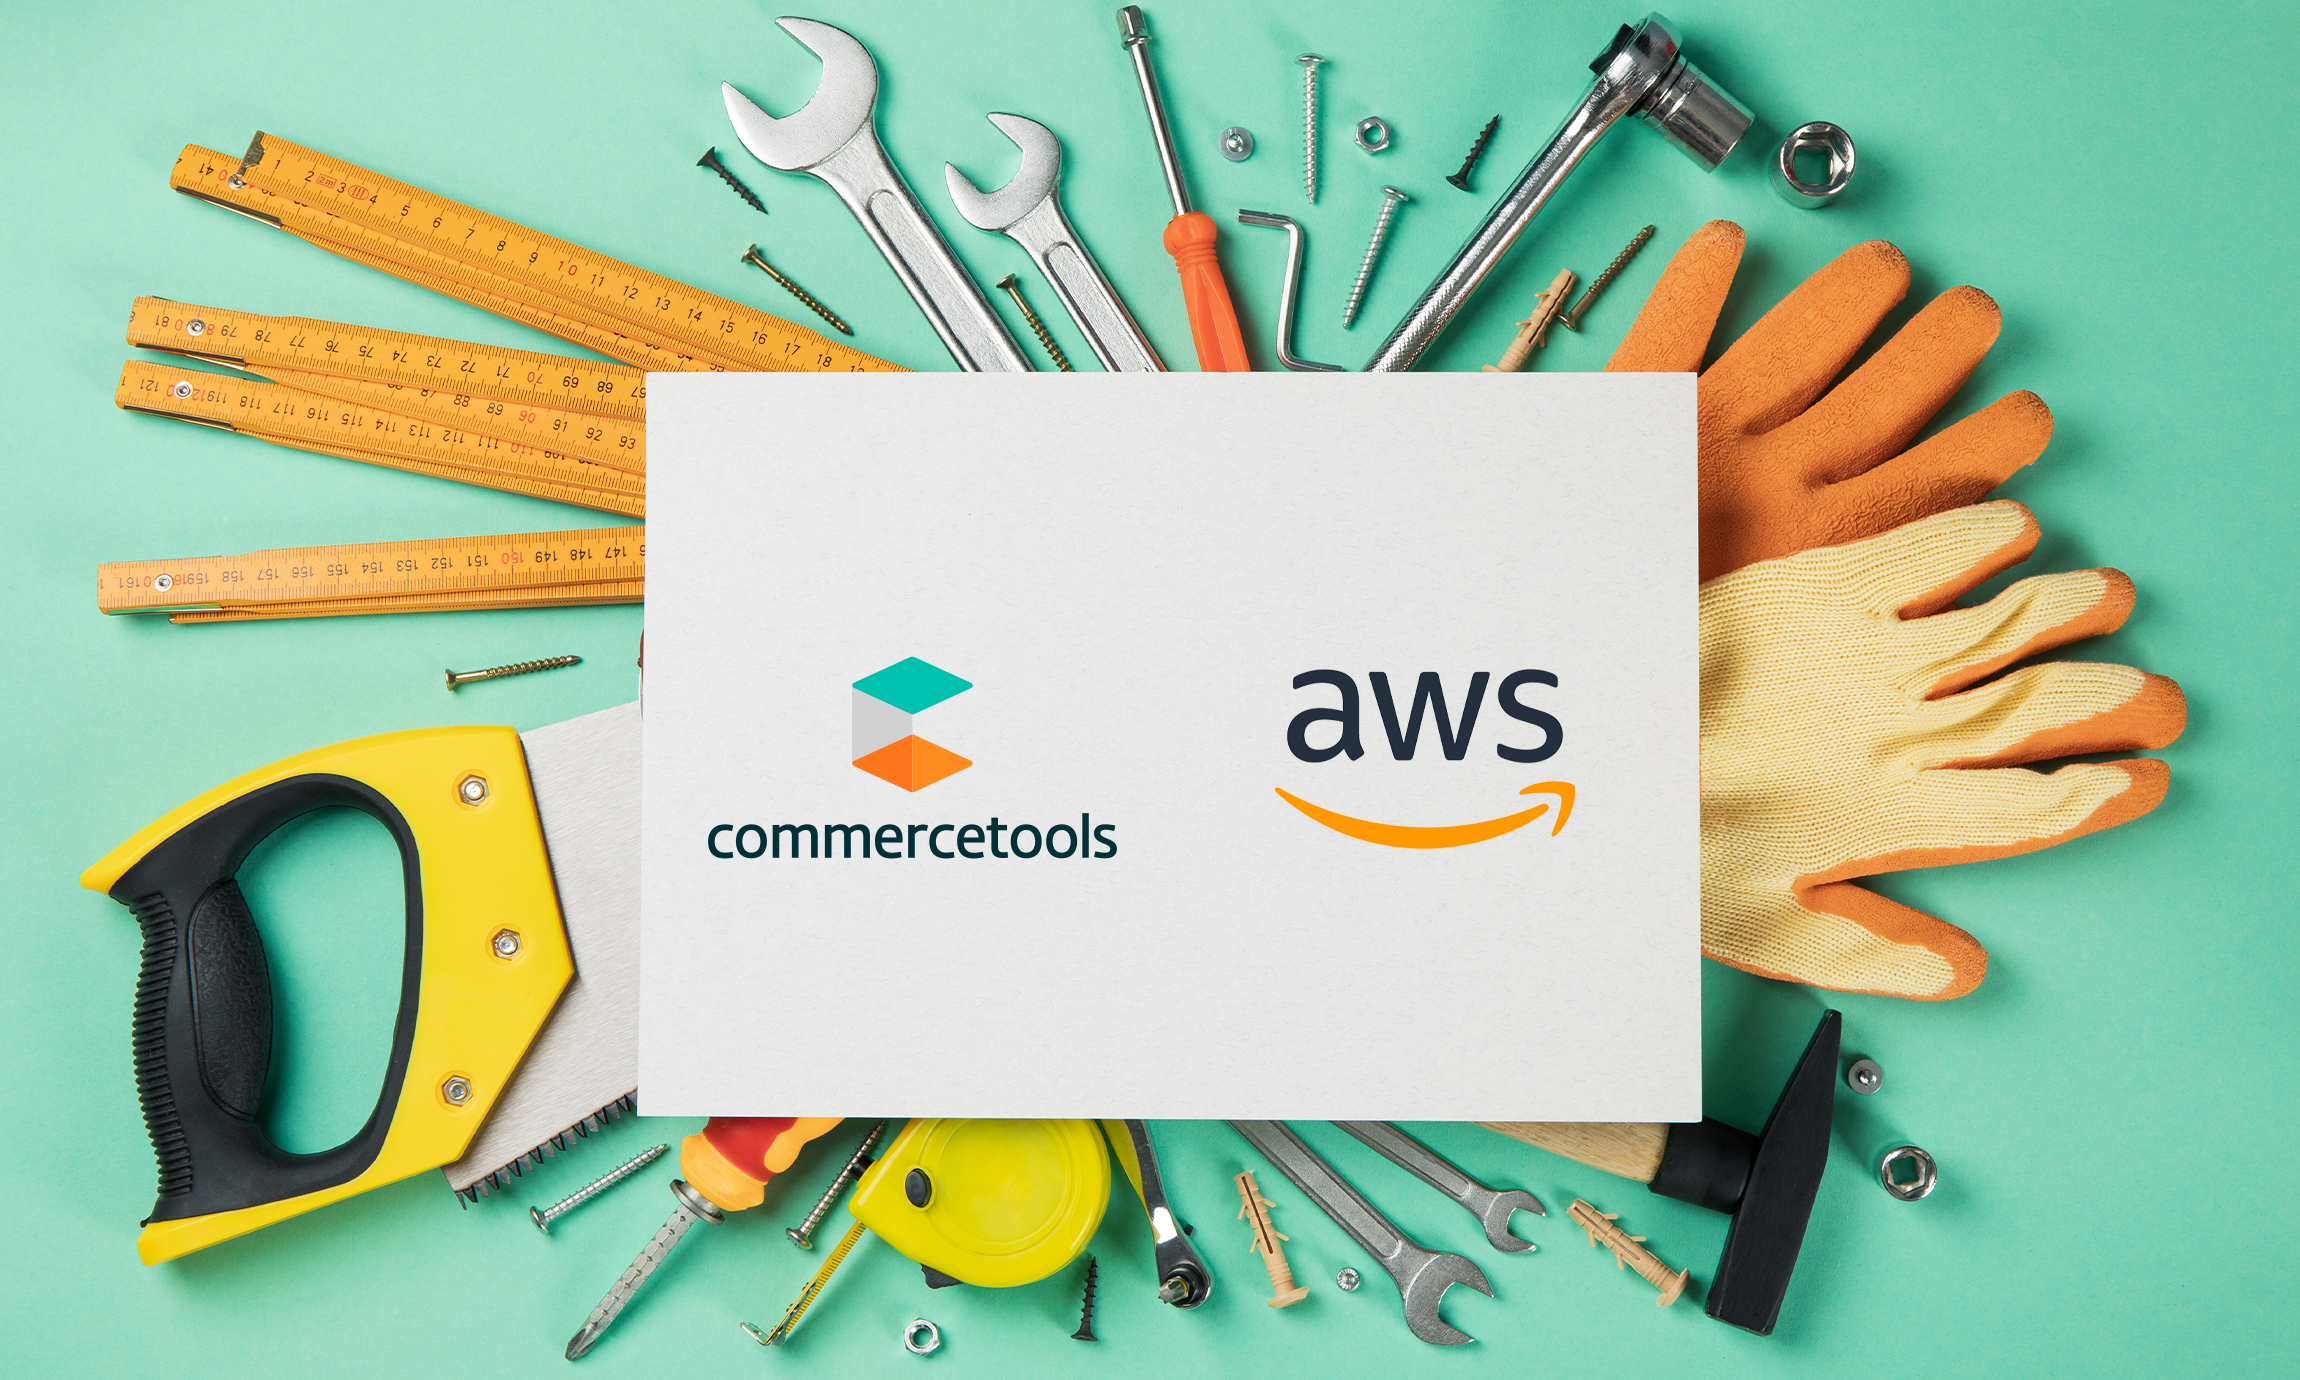 Blog post Beyond build vs. buy: How commercetools and AWS enable retailers to customise eCommerce shops without limits